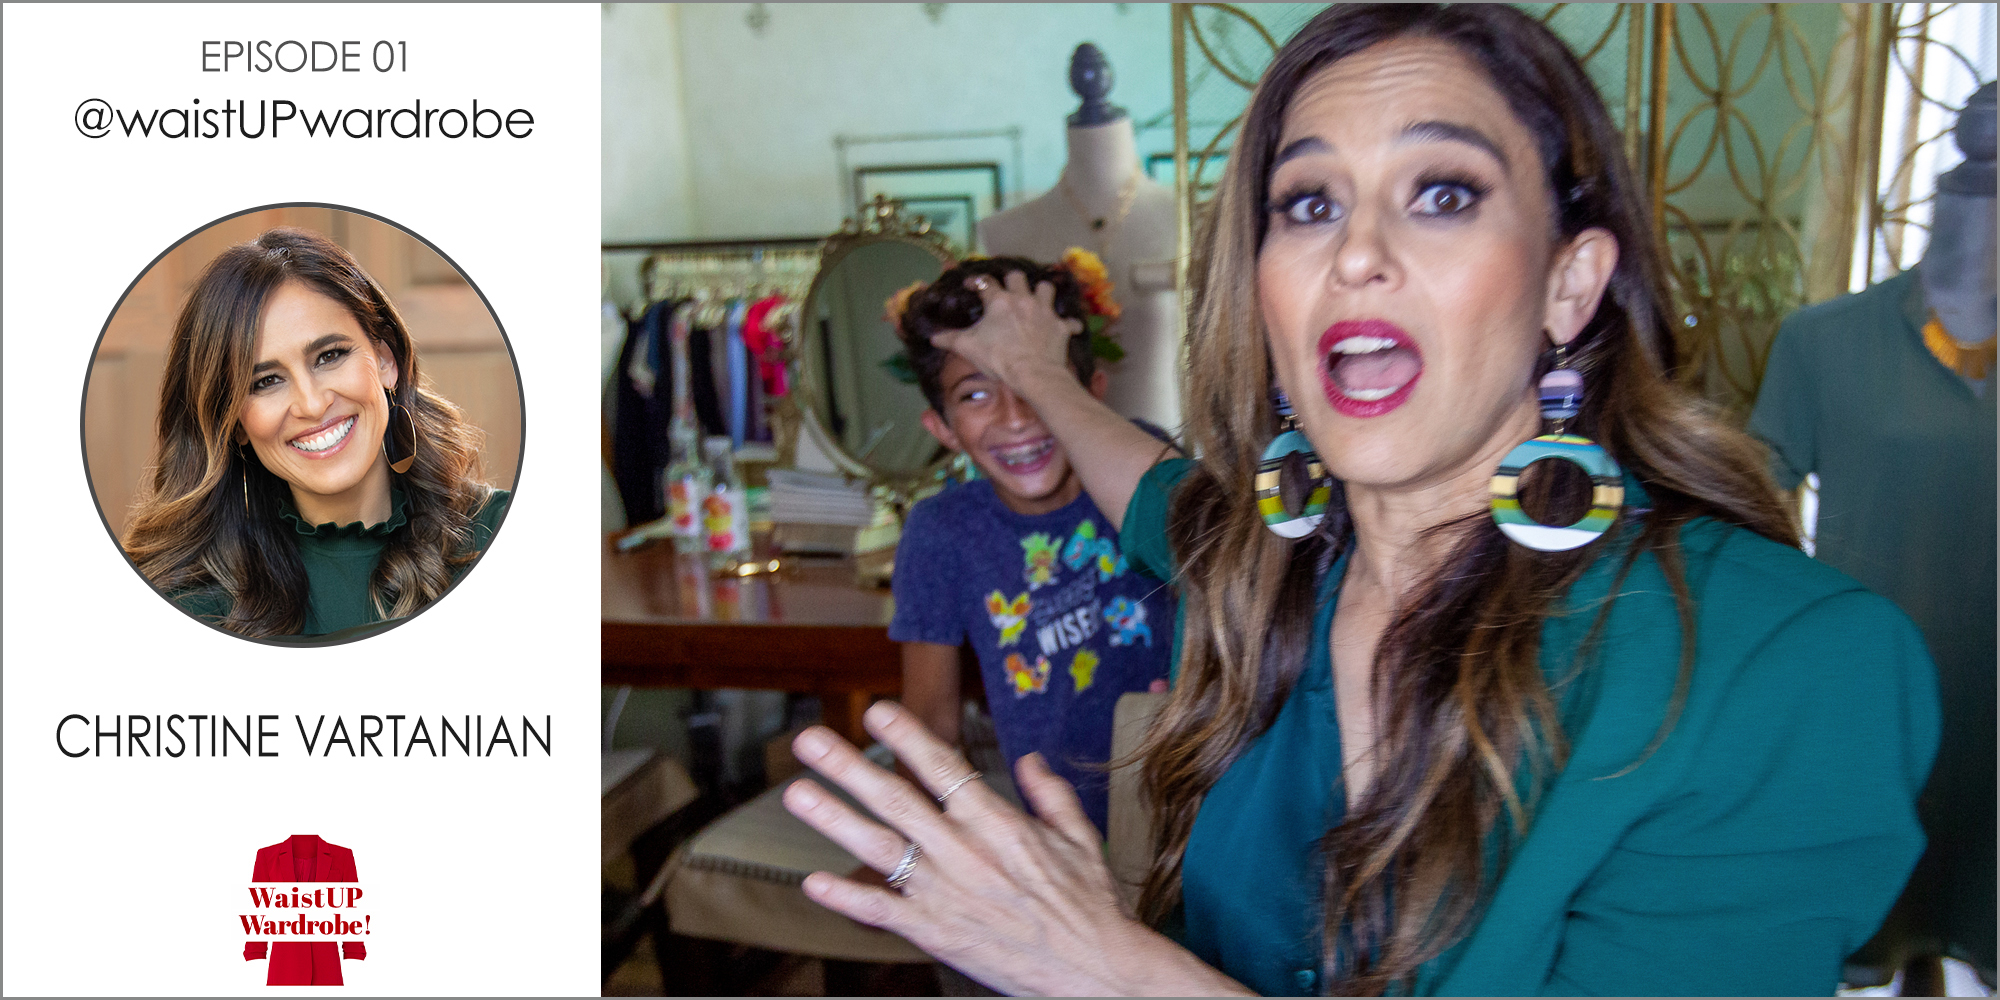 Christine Vartanian wearing large colorful earrings and teal shirt caught mid-moment pushing her son away behind her for being in her camera shot for her first blooper episode